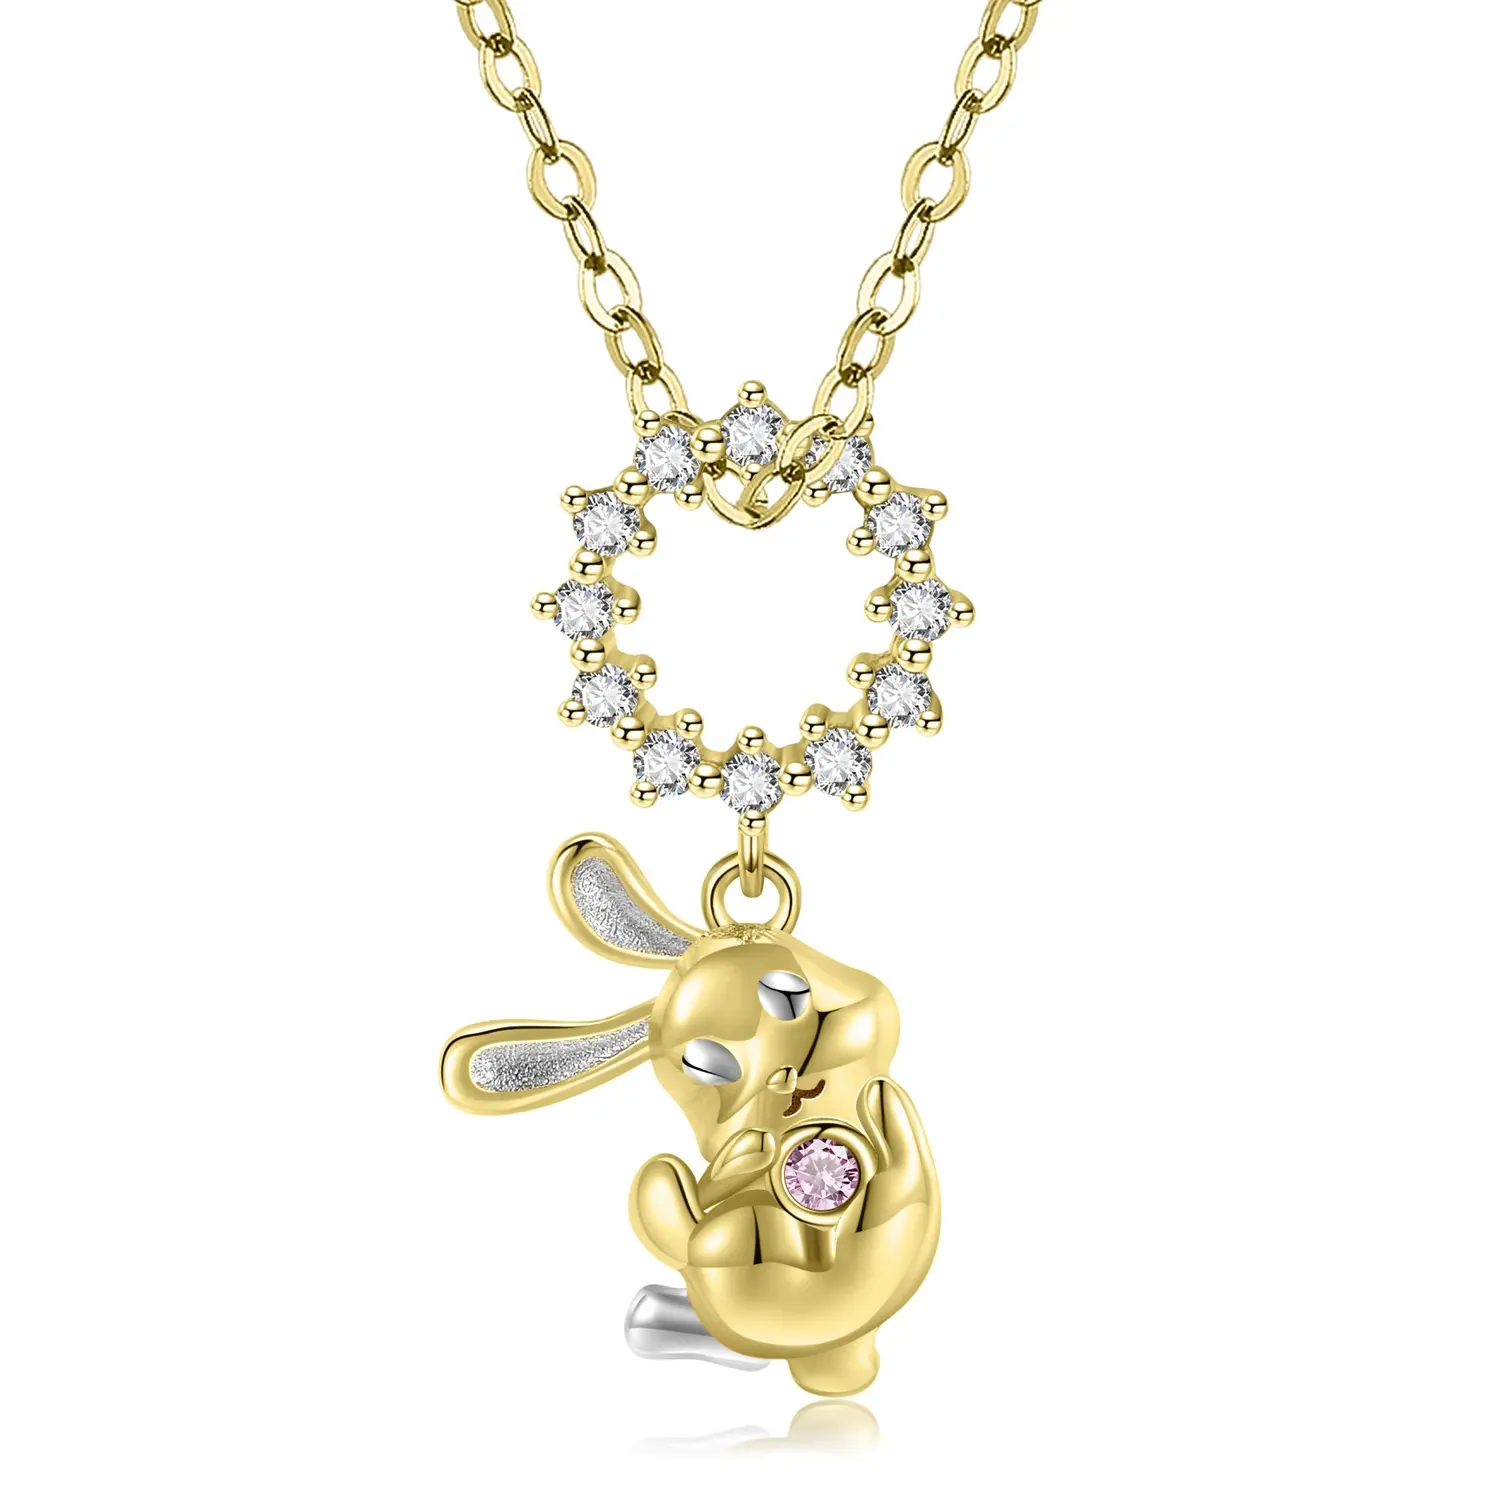 Cute Golden Bunny Pendant For Necklace Authentic 925 Sterling Silver Animal Rabbit Necklace Jewelry For Women Girl Accessory